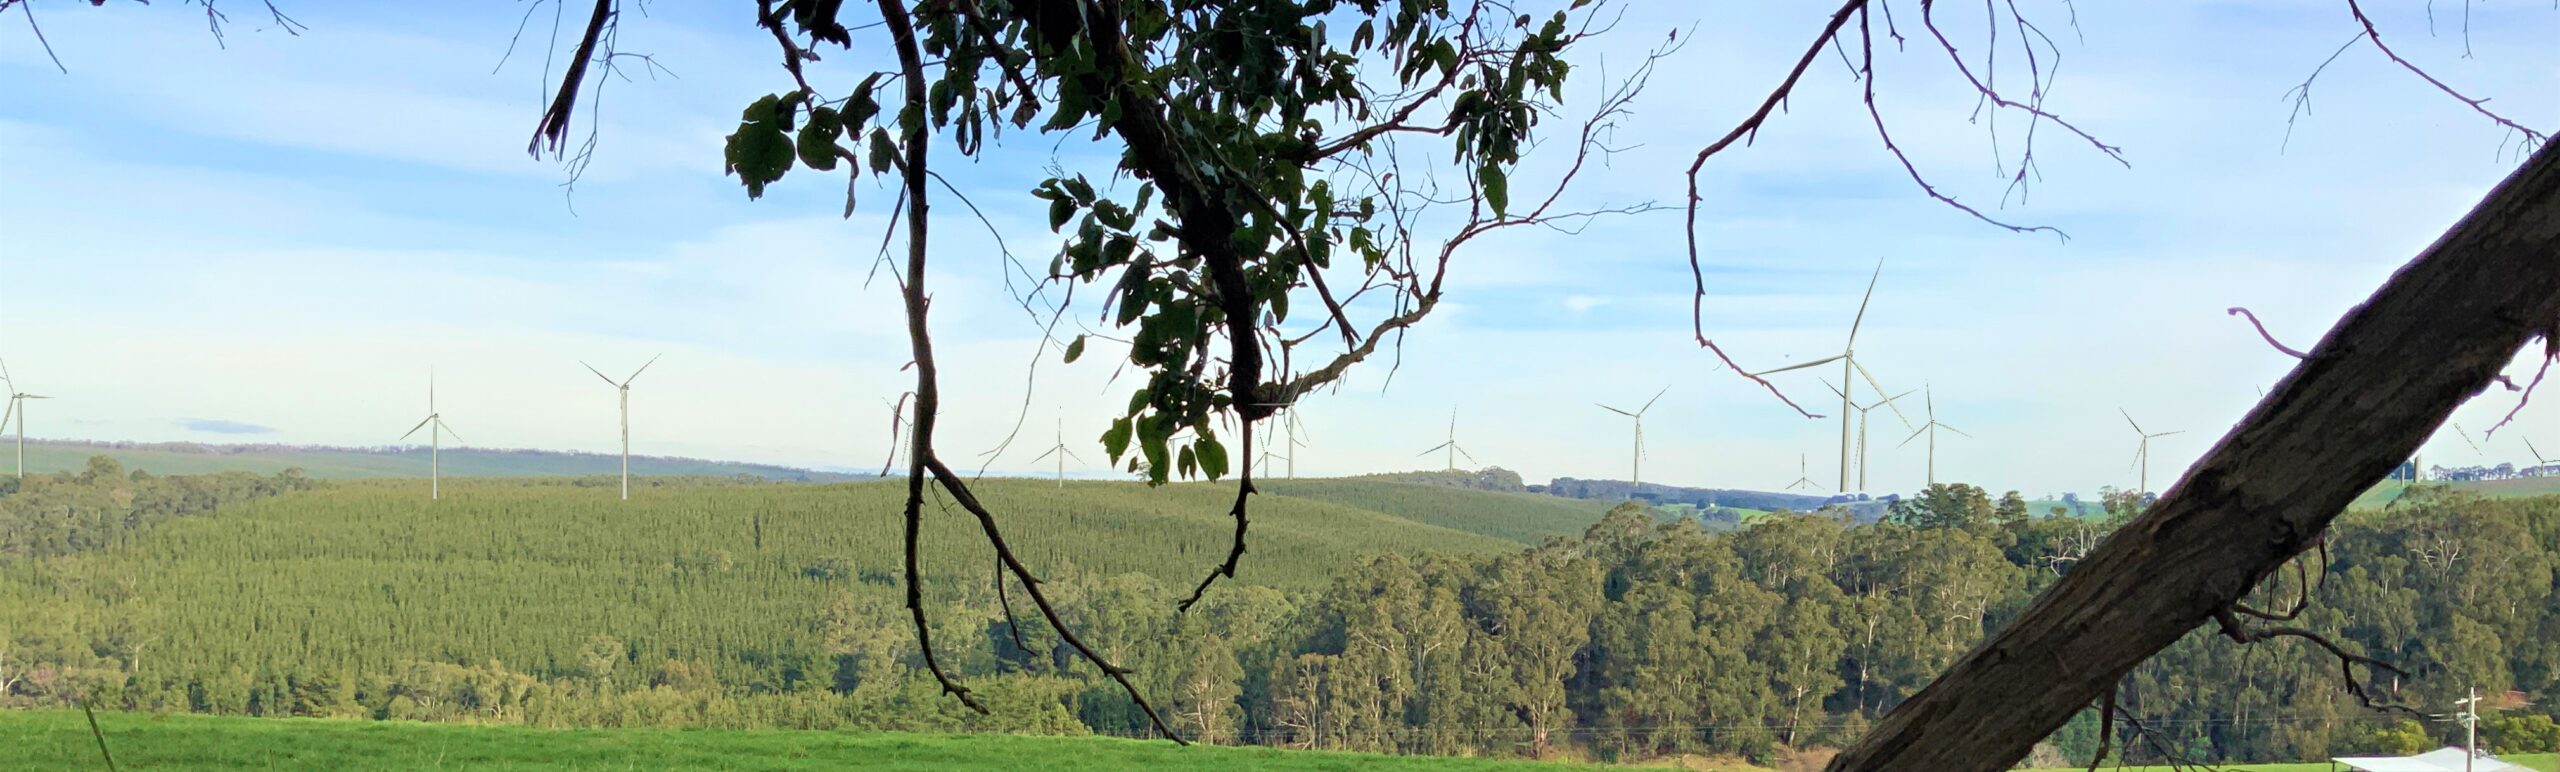 Wide angle shot of Delburn Wind Farm turbines, with native vegetation in the foreground